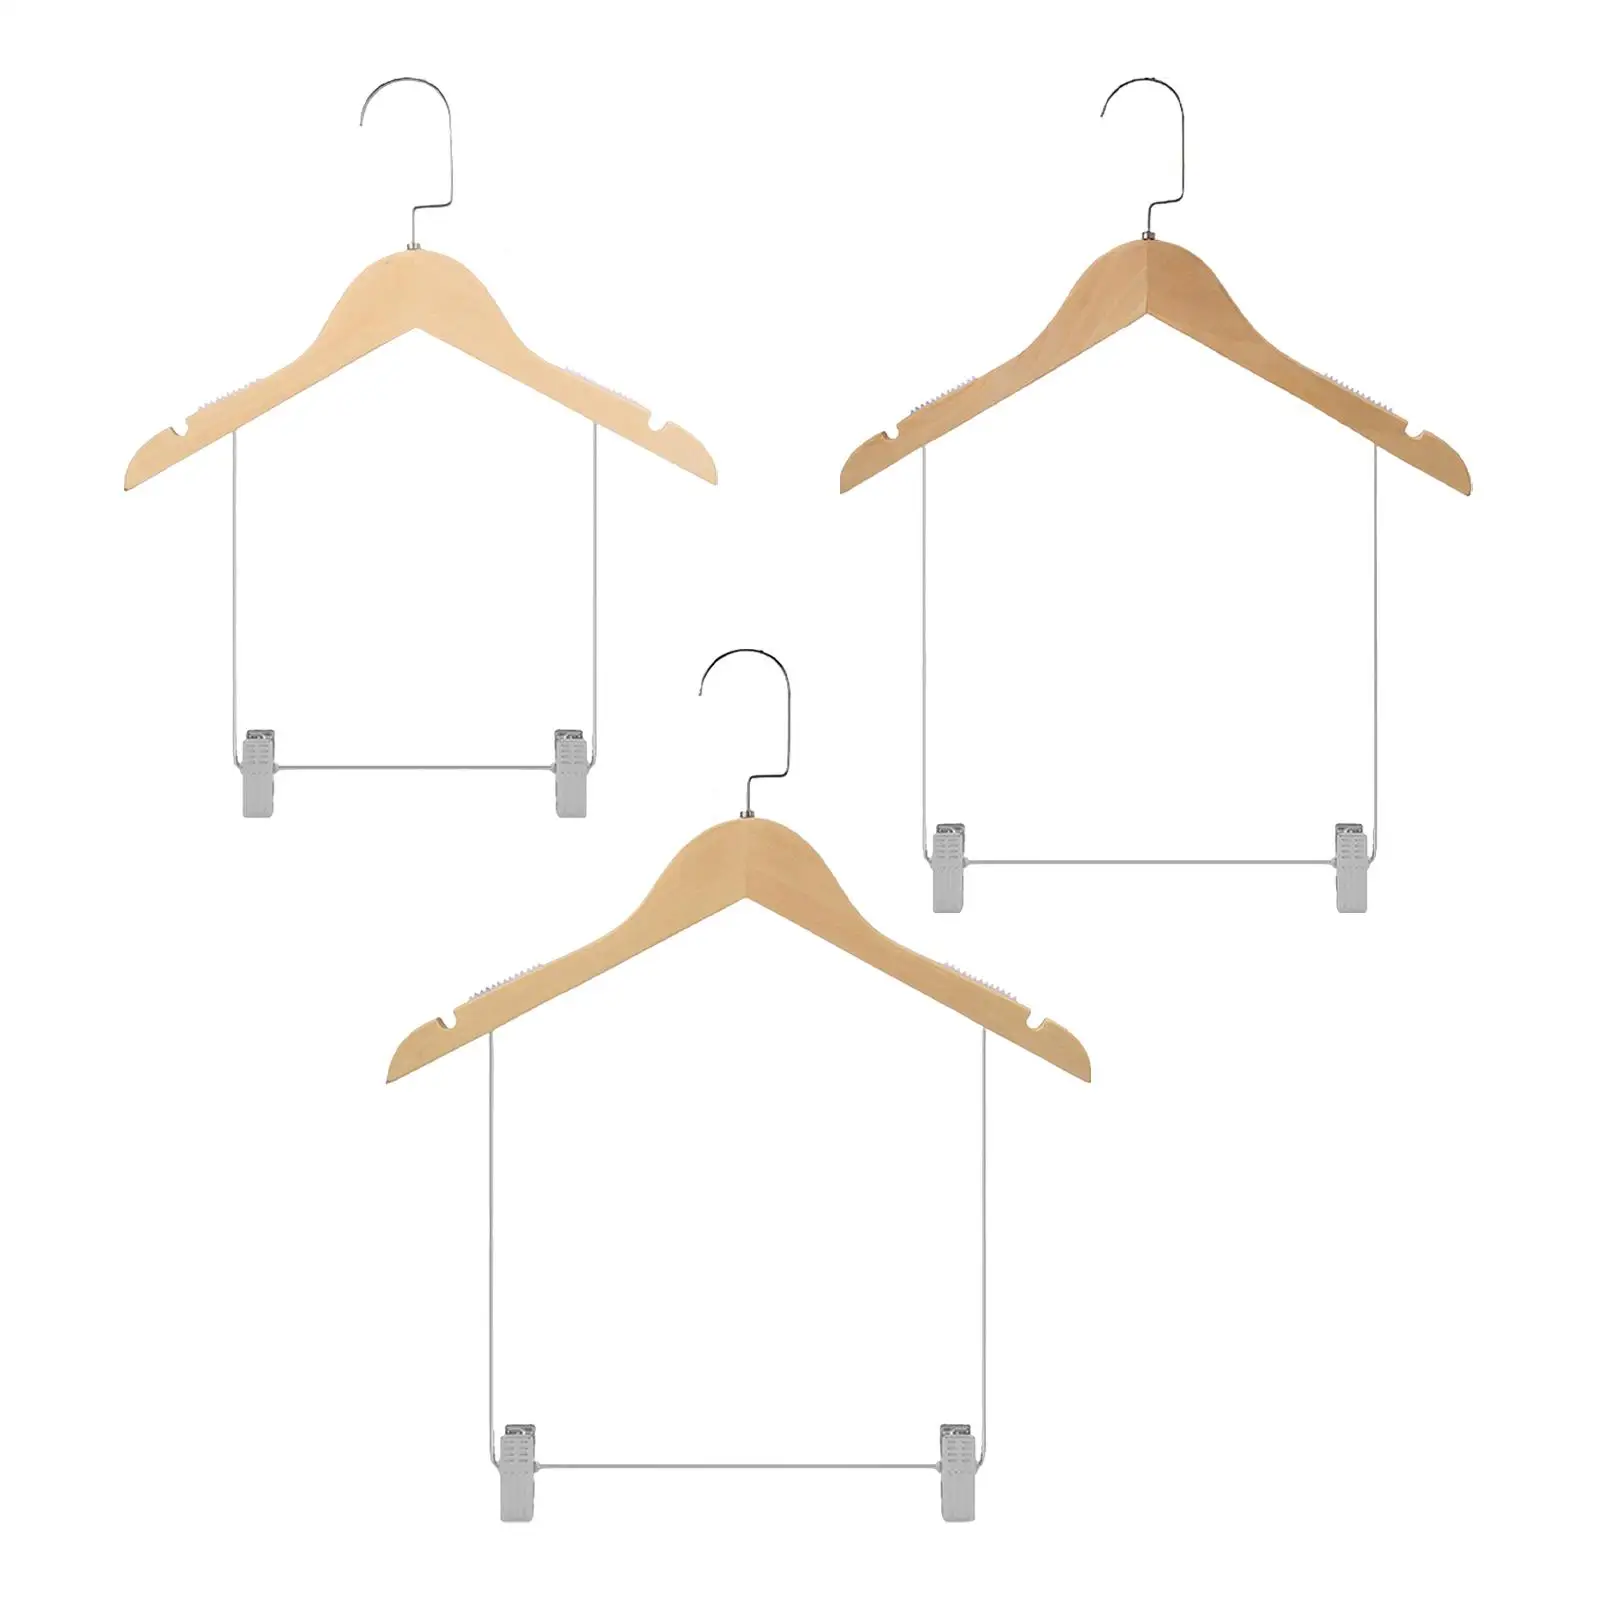 Wooden hangers with shoulder grooves with adjustable metal clips Heavy duty 360